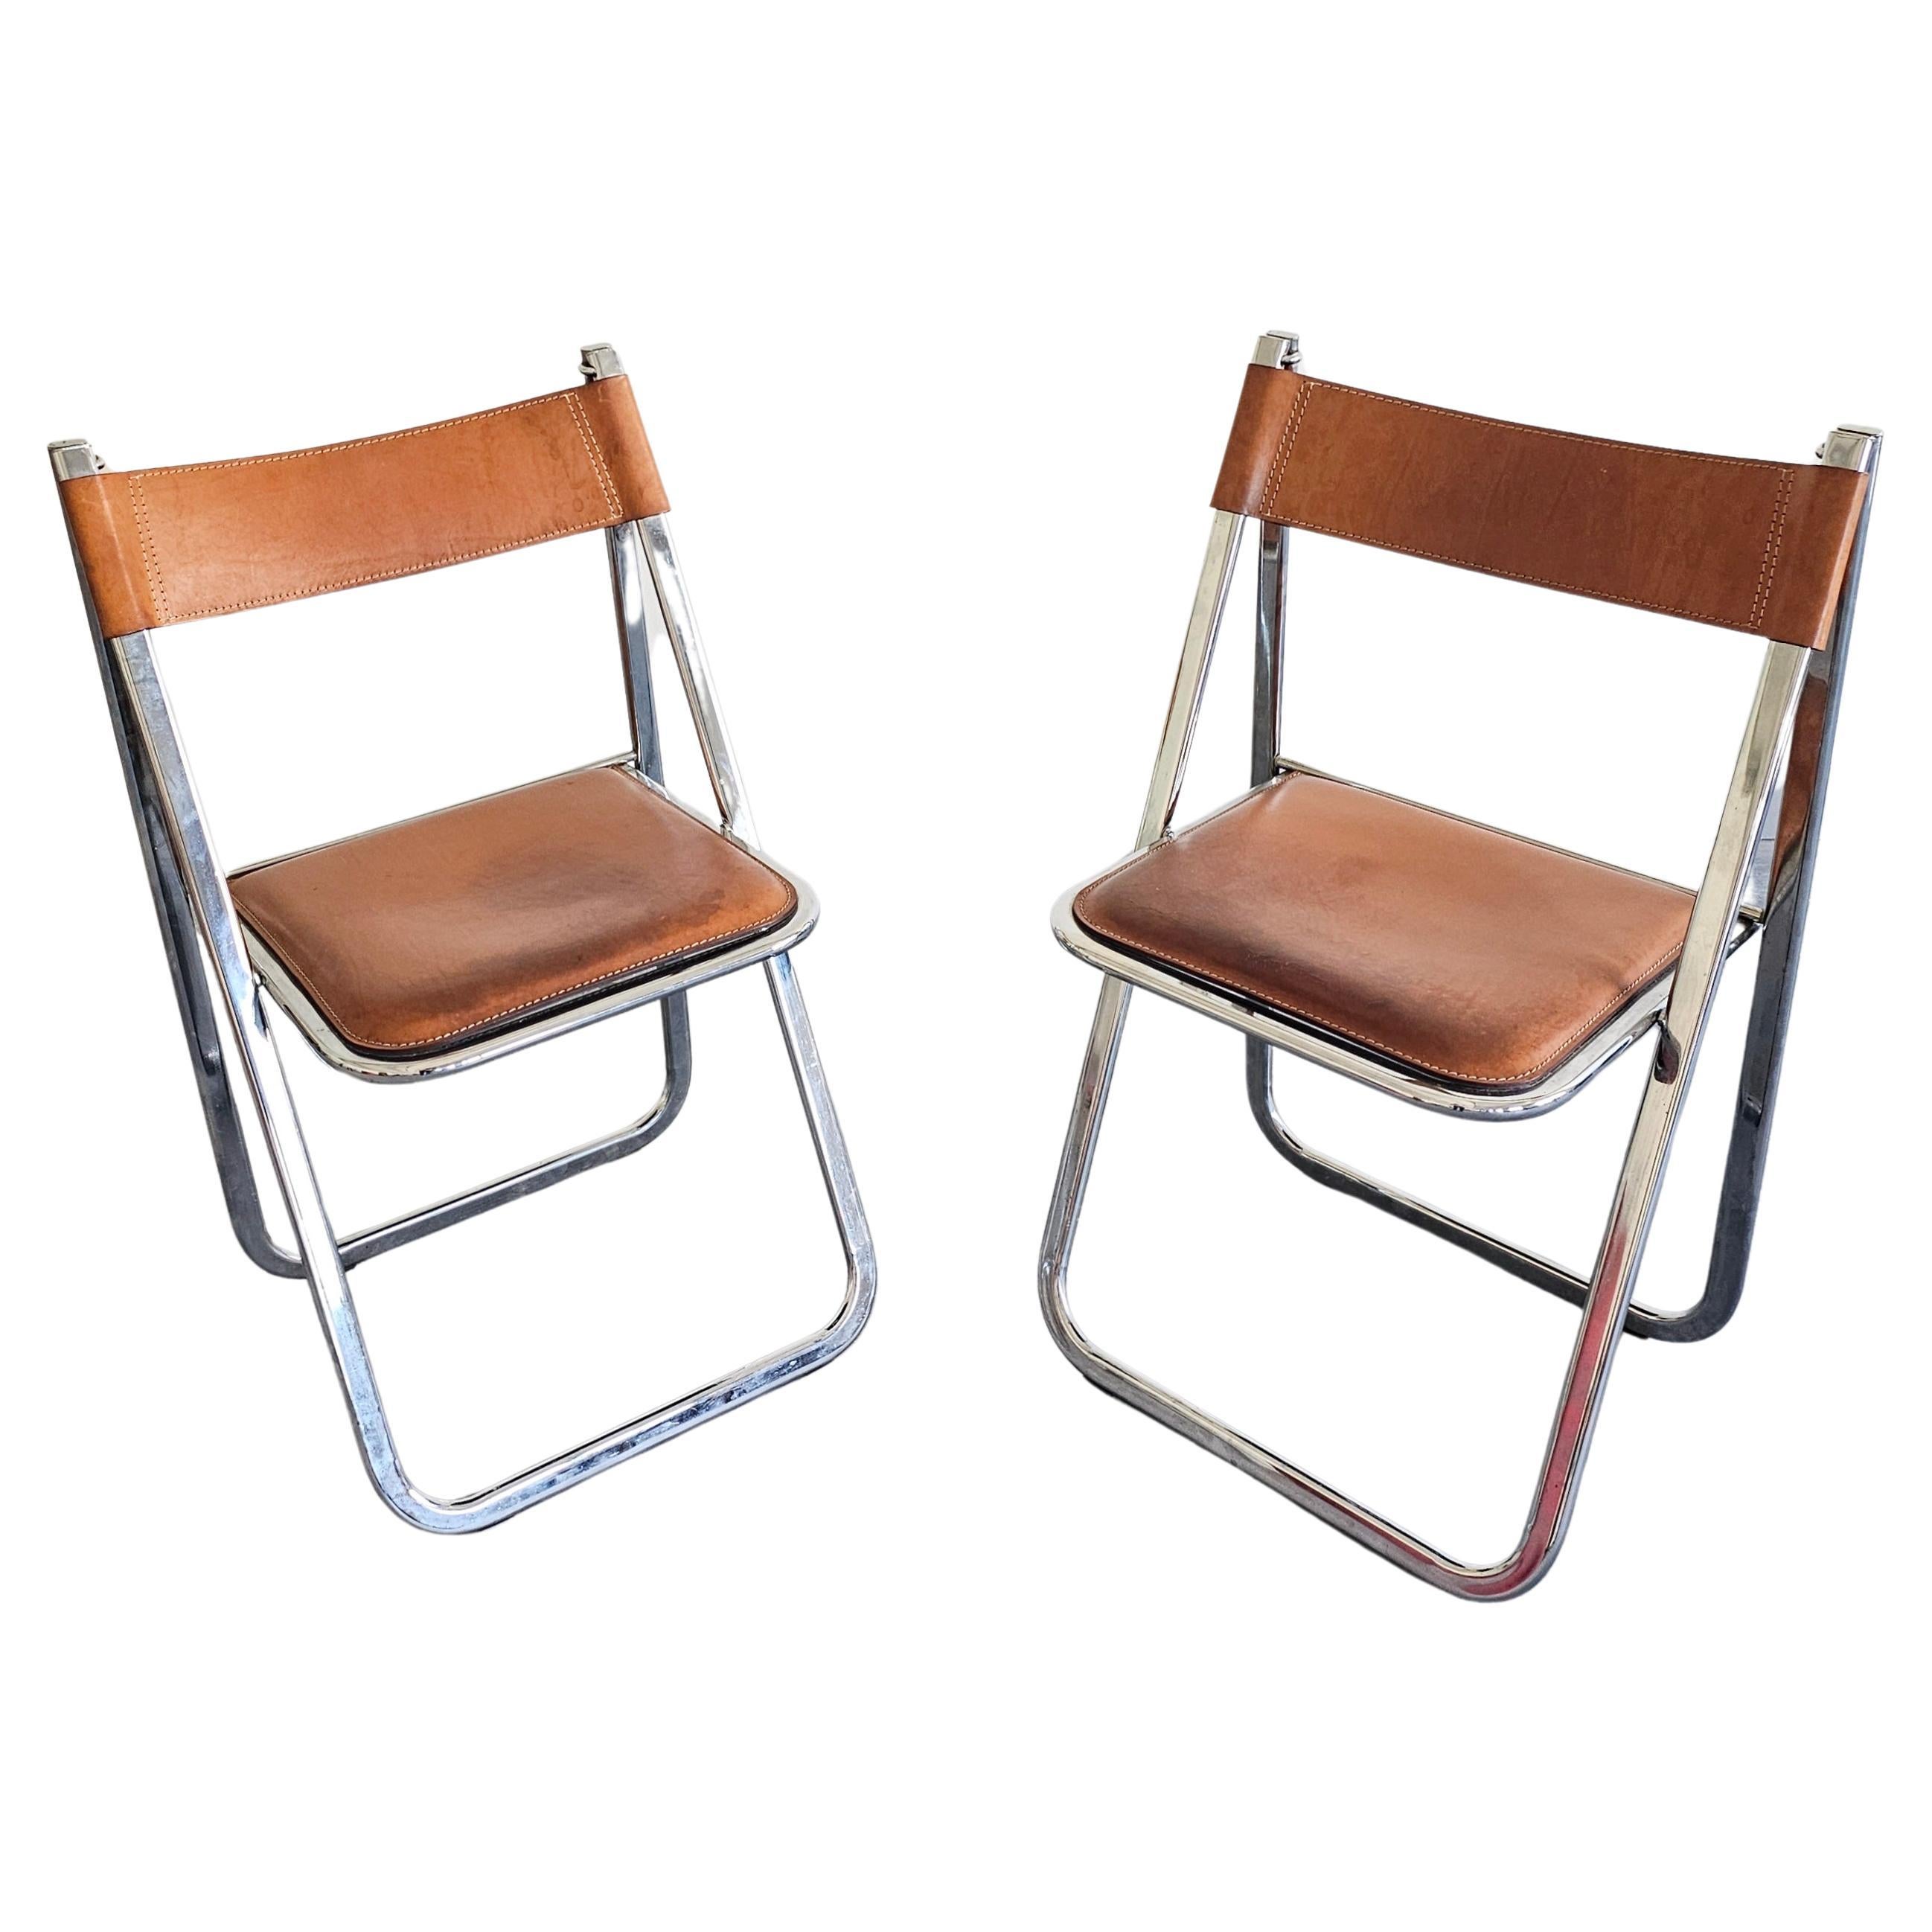 Pair of Folding Chairs by Arrben, model Tamara, in cognac leather, Italy 1970s